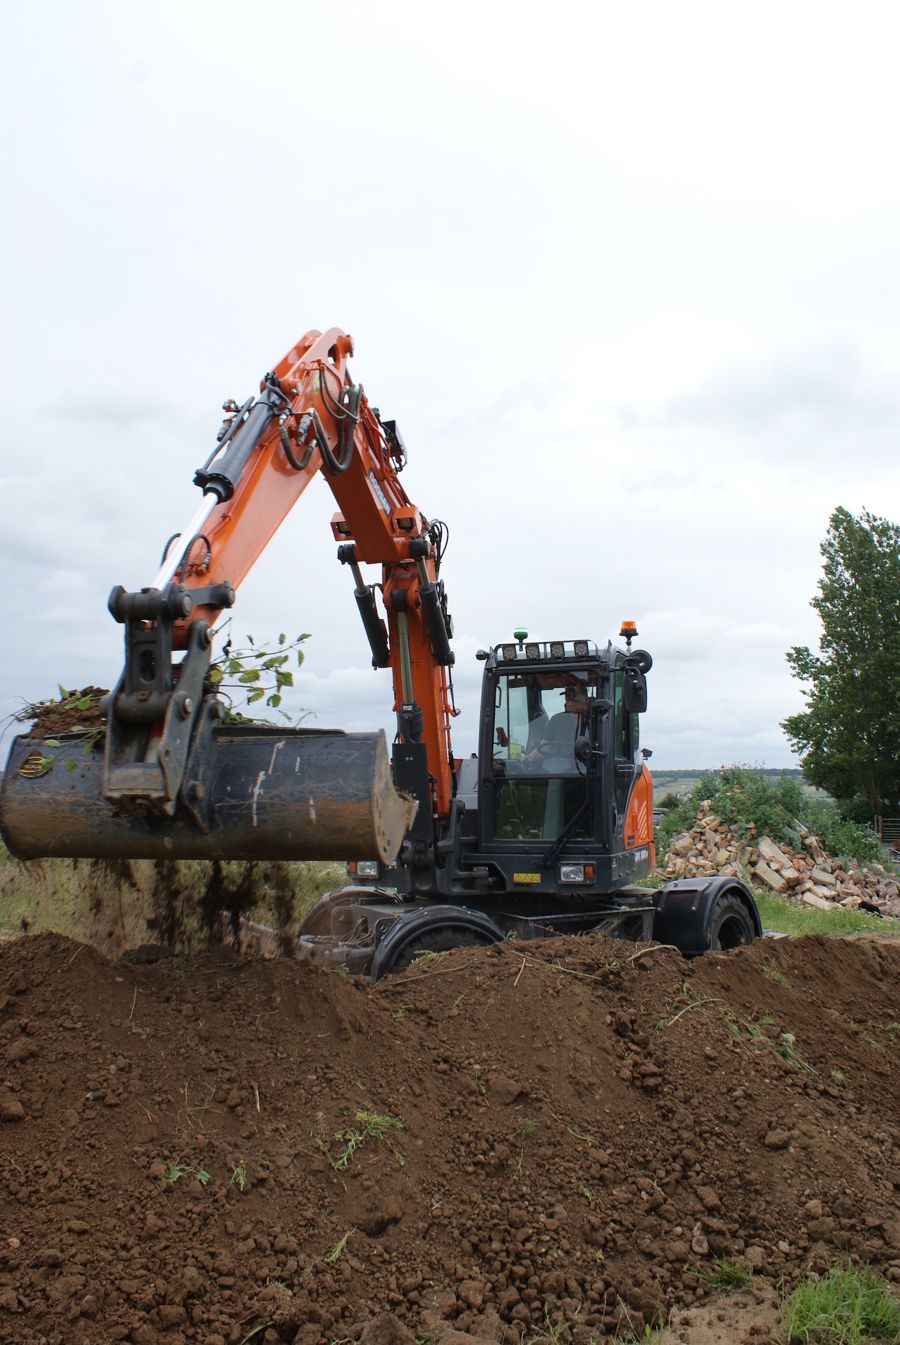 Harwinn Agricultural and Construction evolves with a Develon DX100W-7 Excavator